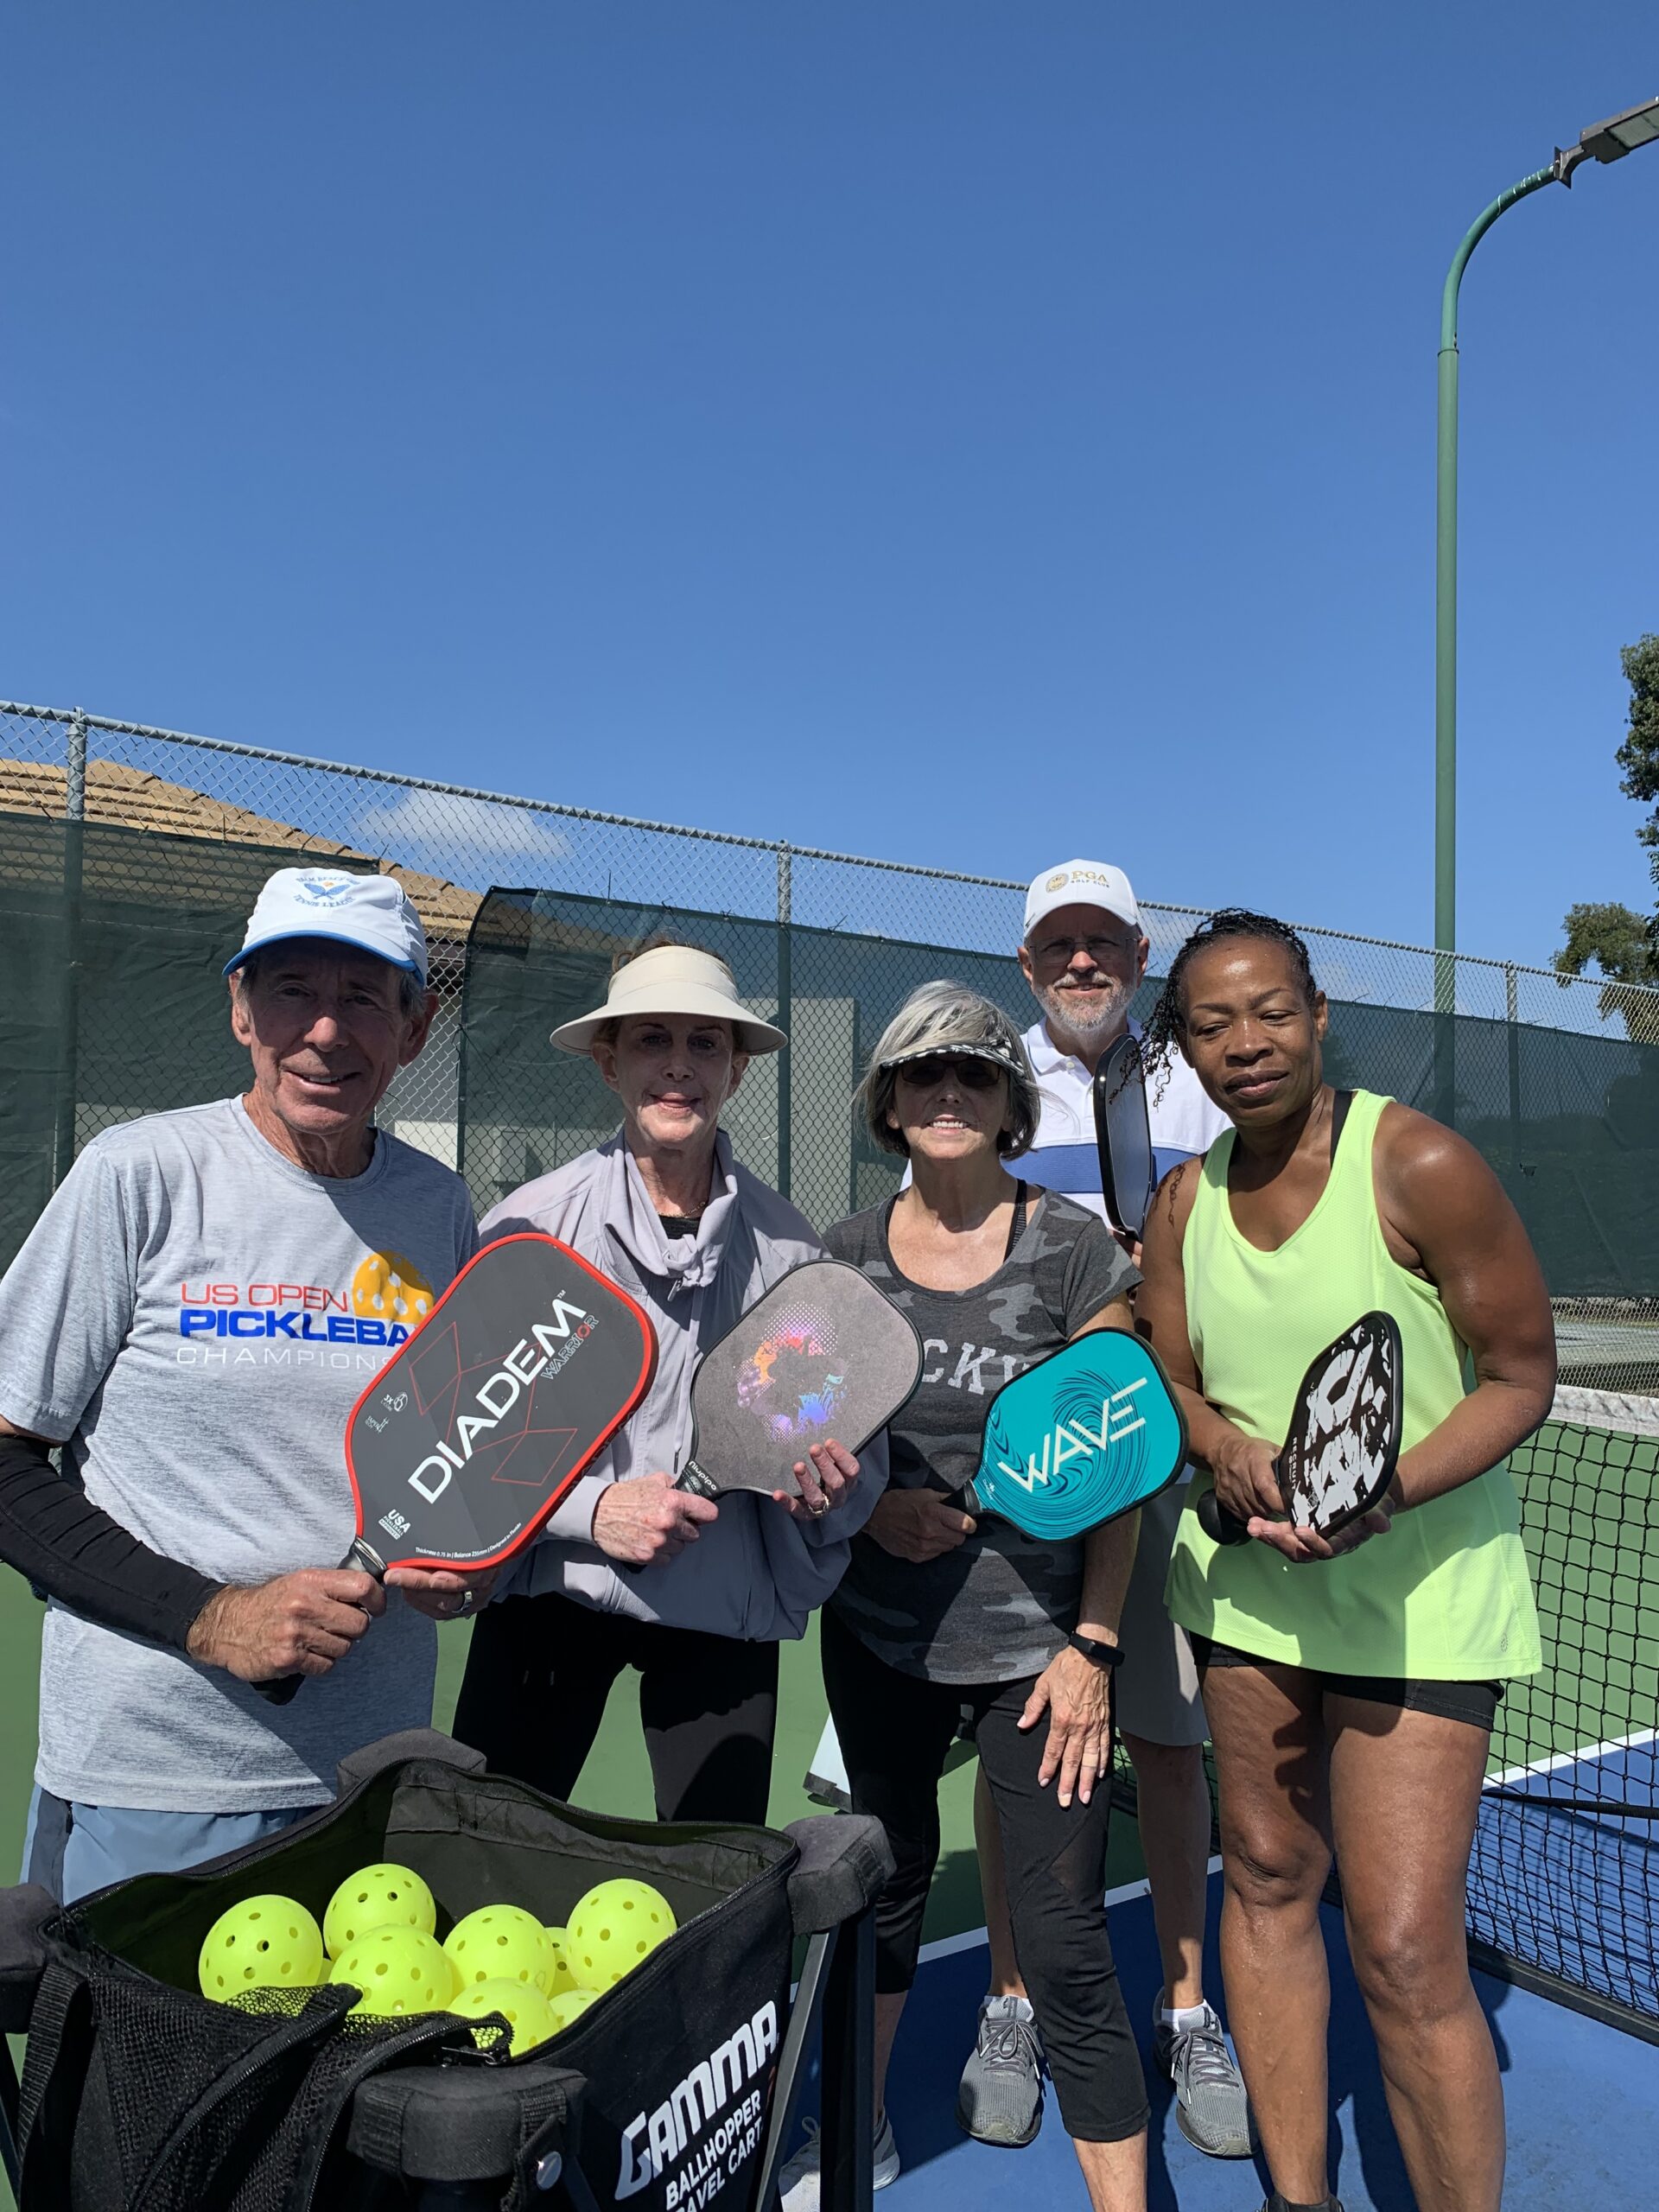 bob-with-kelli-jeff-judy-and-margie-after-a-beginners-pickleball-clinic-in-lake-worth